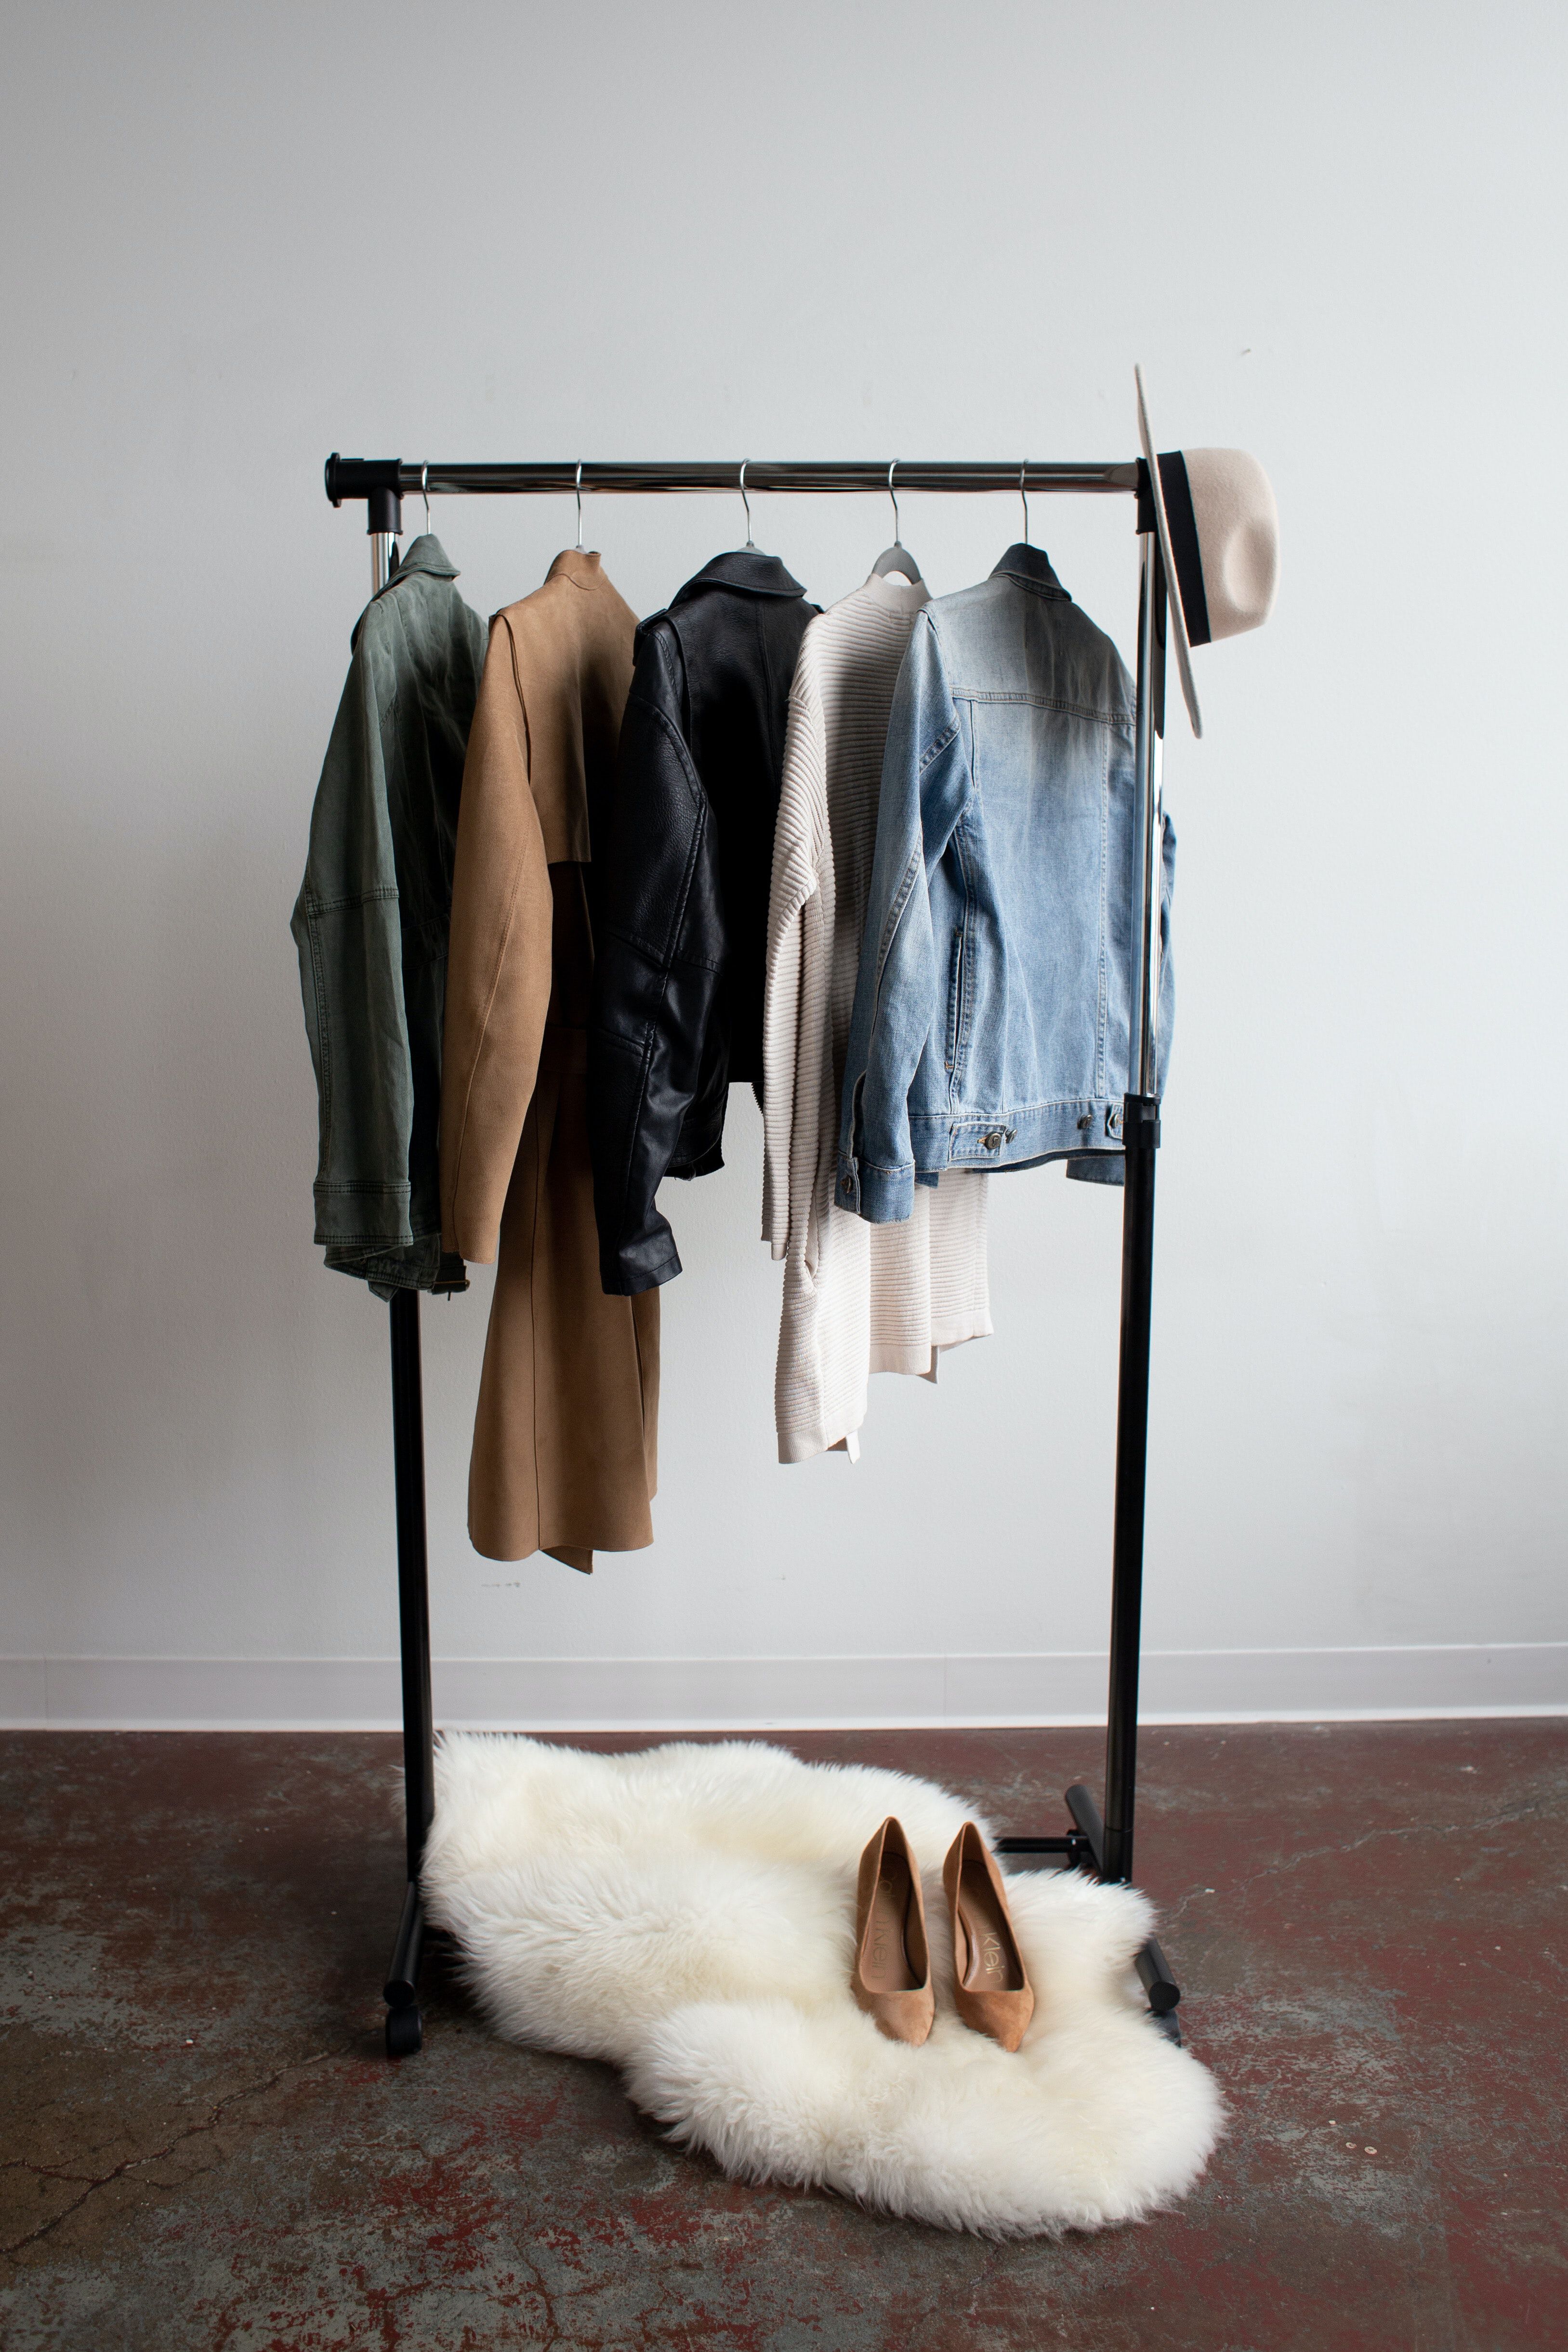 How to start your capsule wardrobe